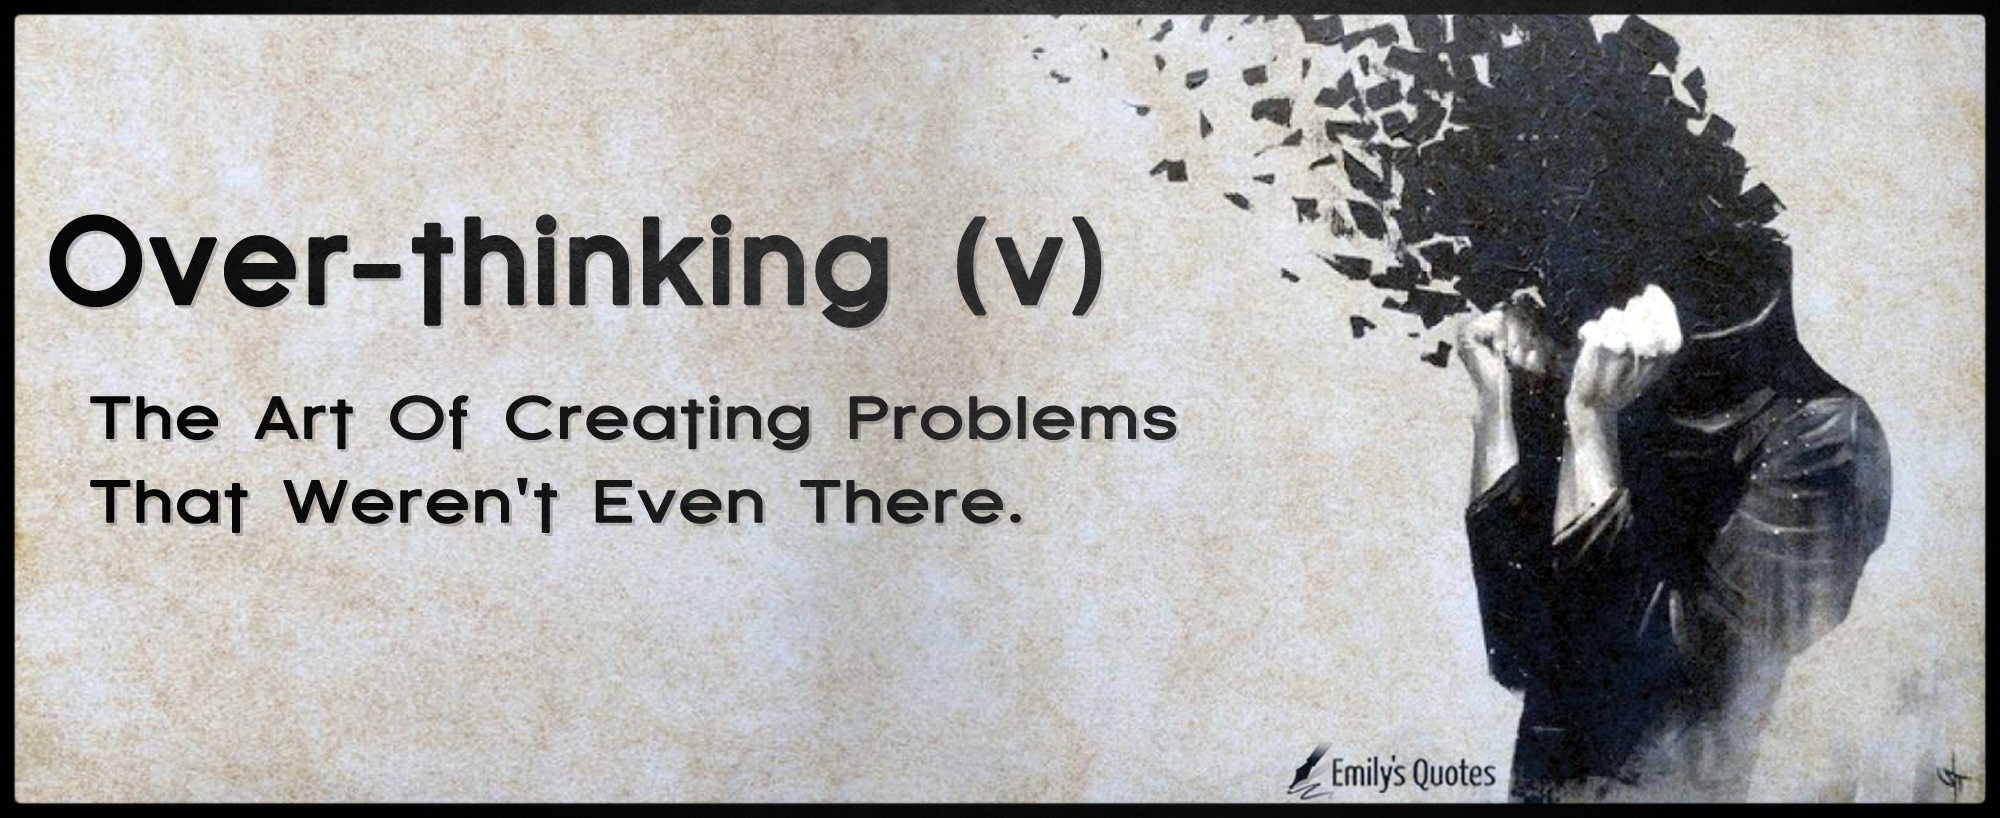 Over-thinking (v) The art of creating problems that weren’t even there